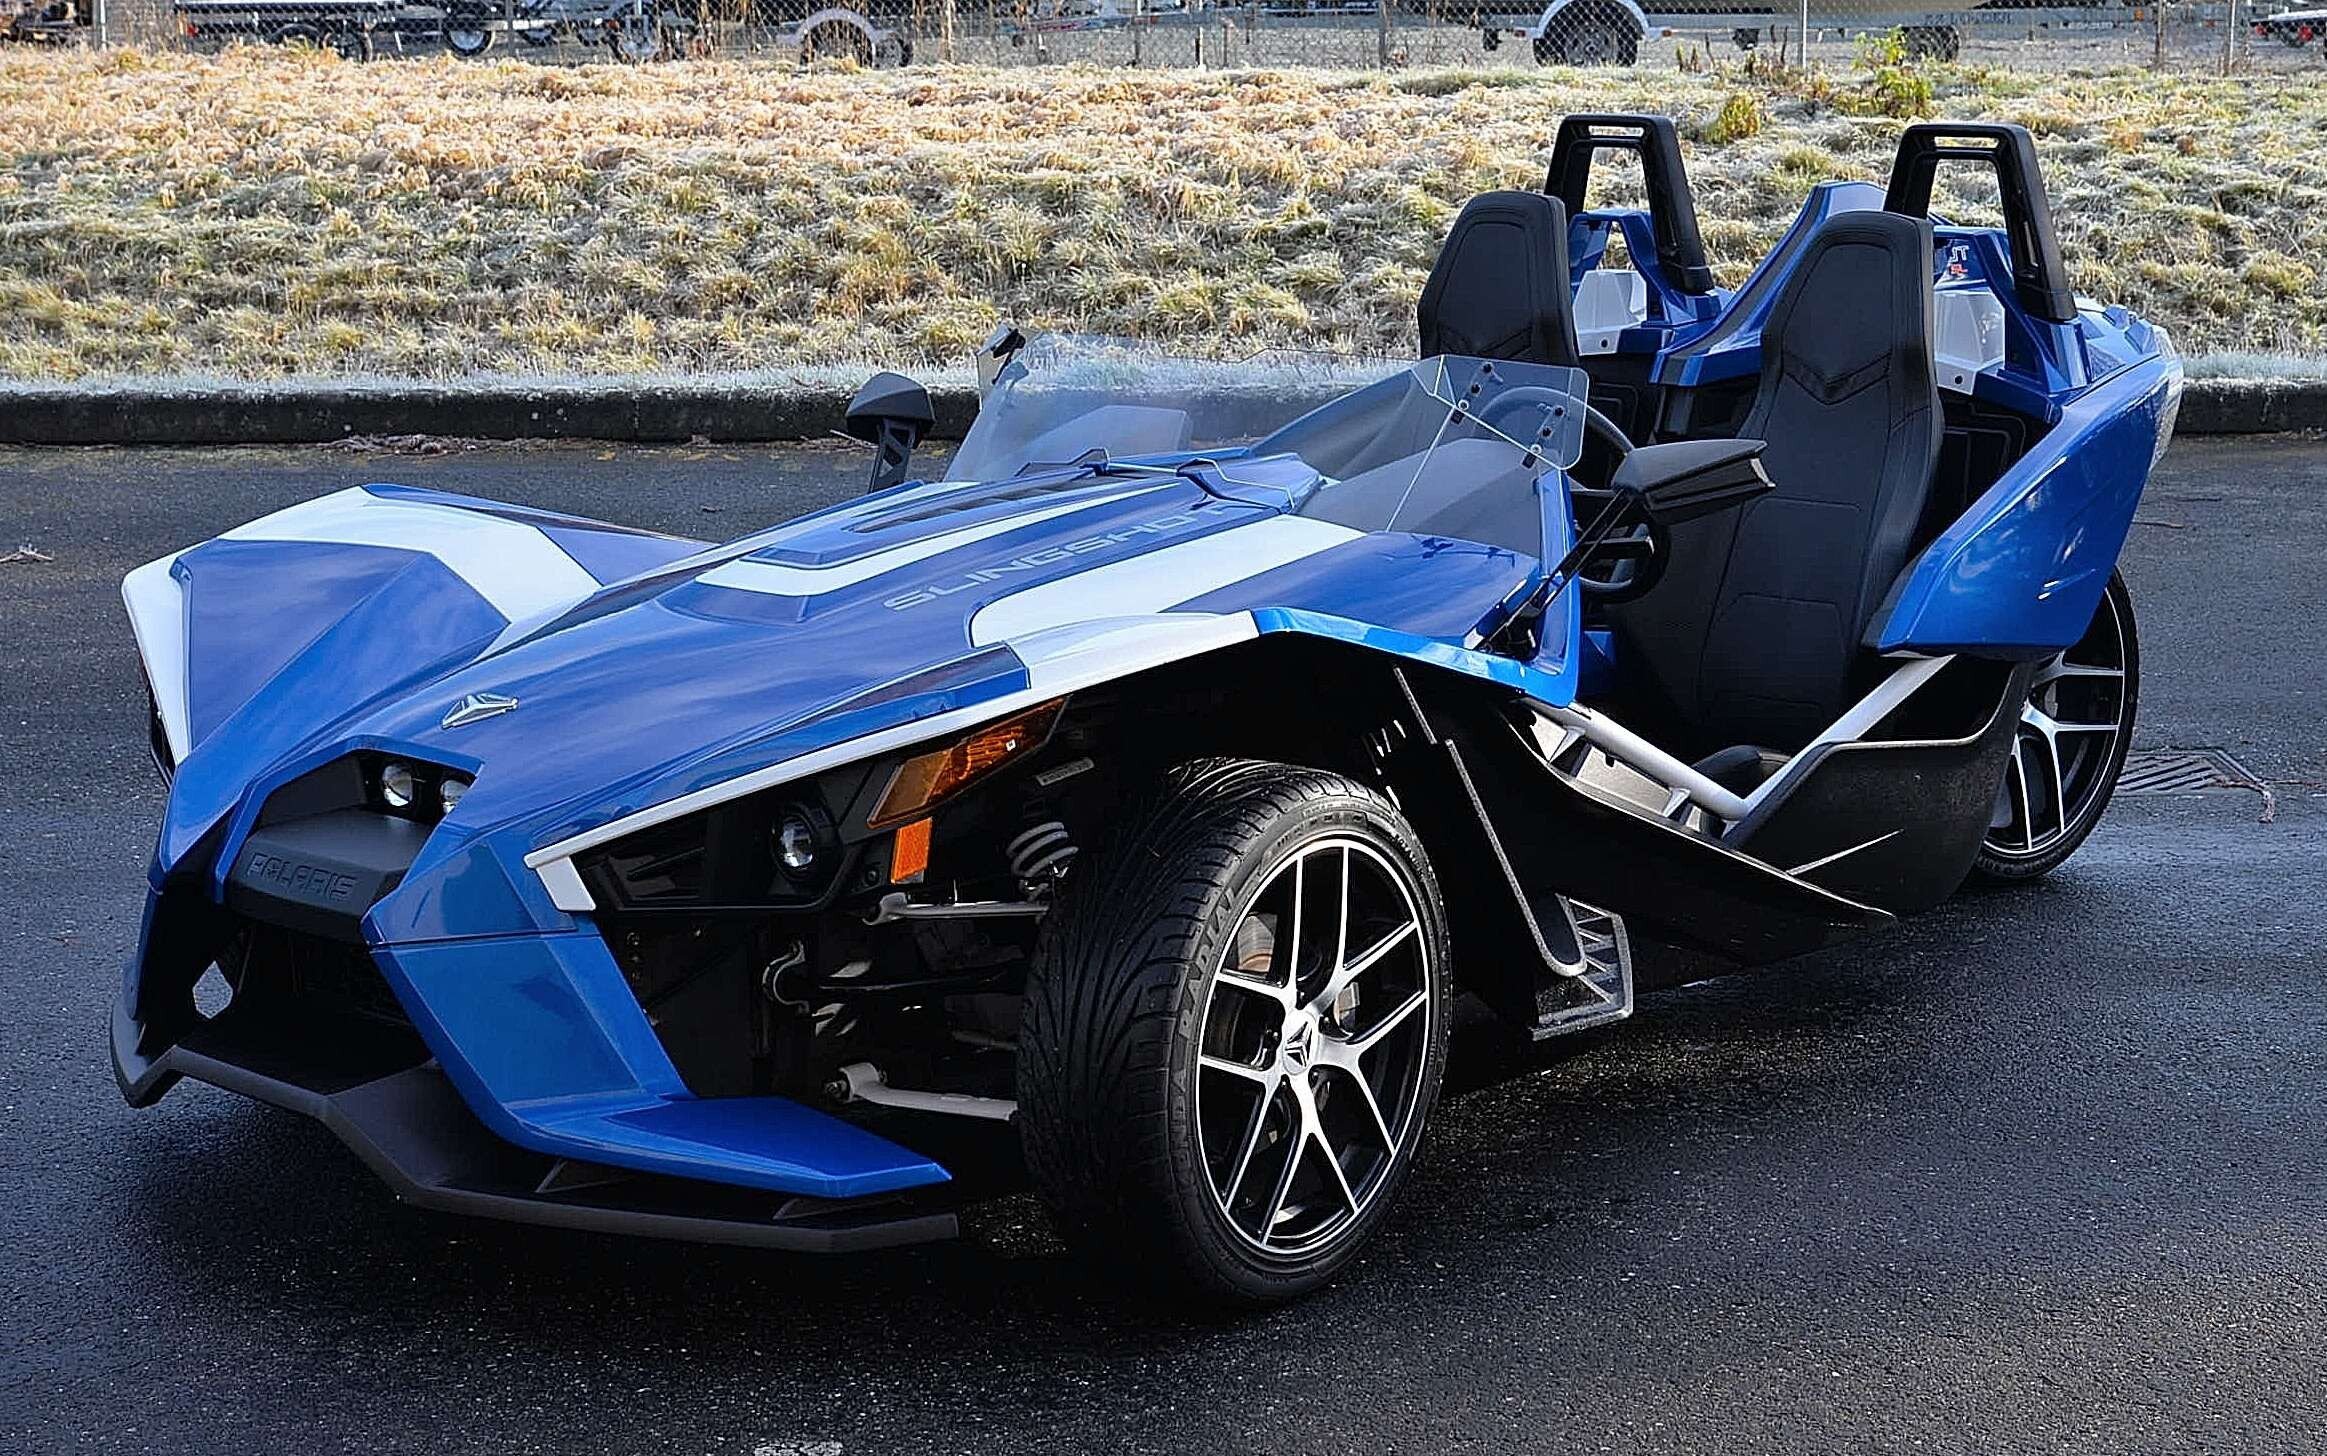 Polaris Slingshot Motorcycles for Sale - Motorcycles on Autotrader